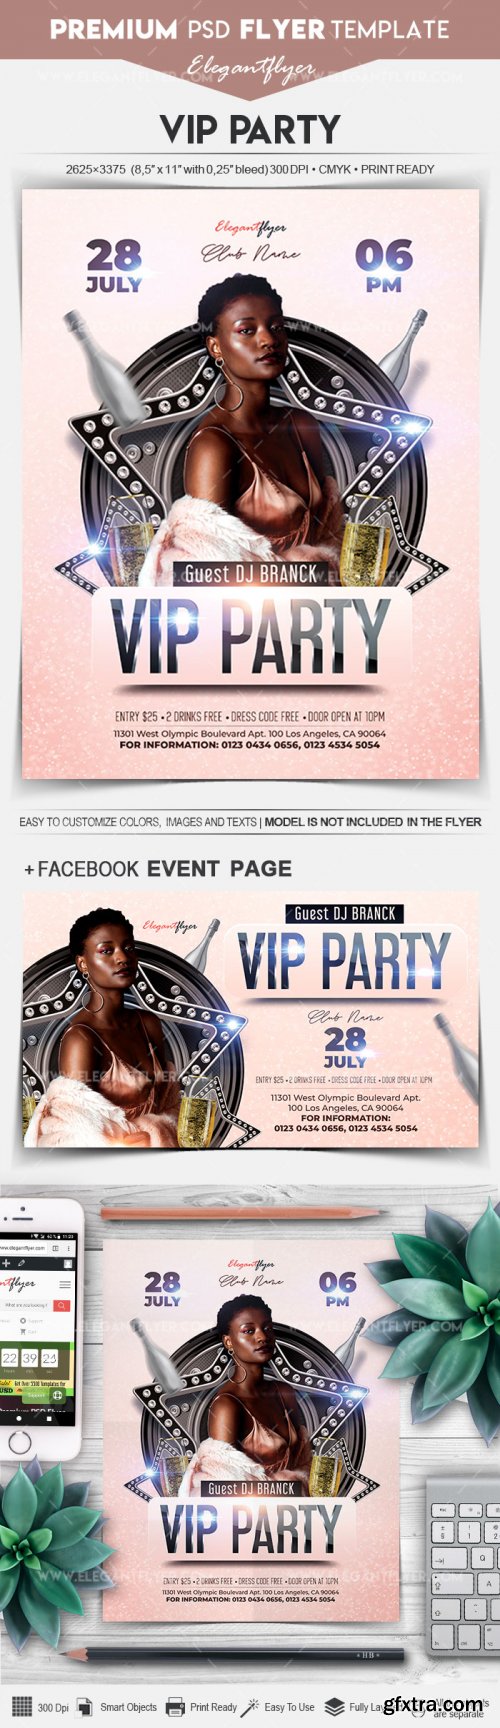 VIP Party V10 2018 Flyer PSD Template